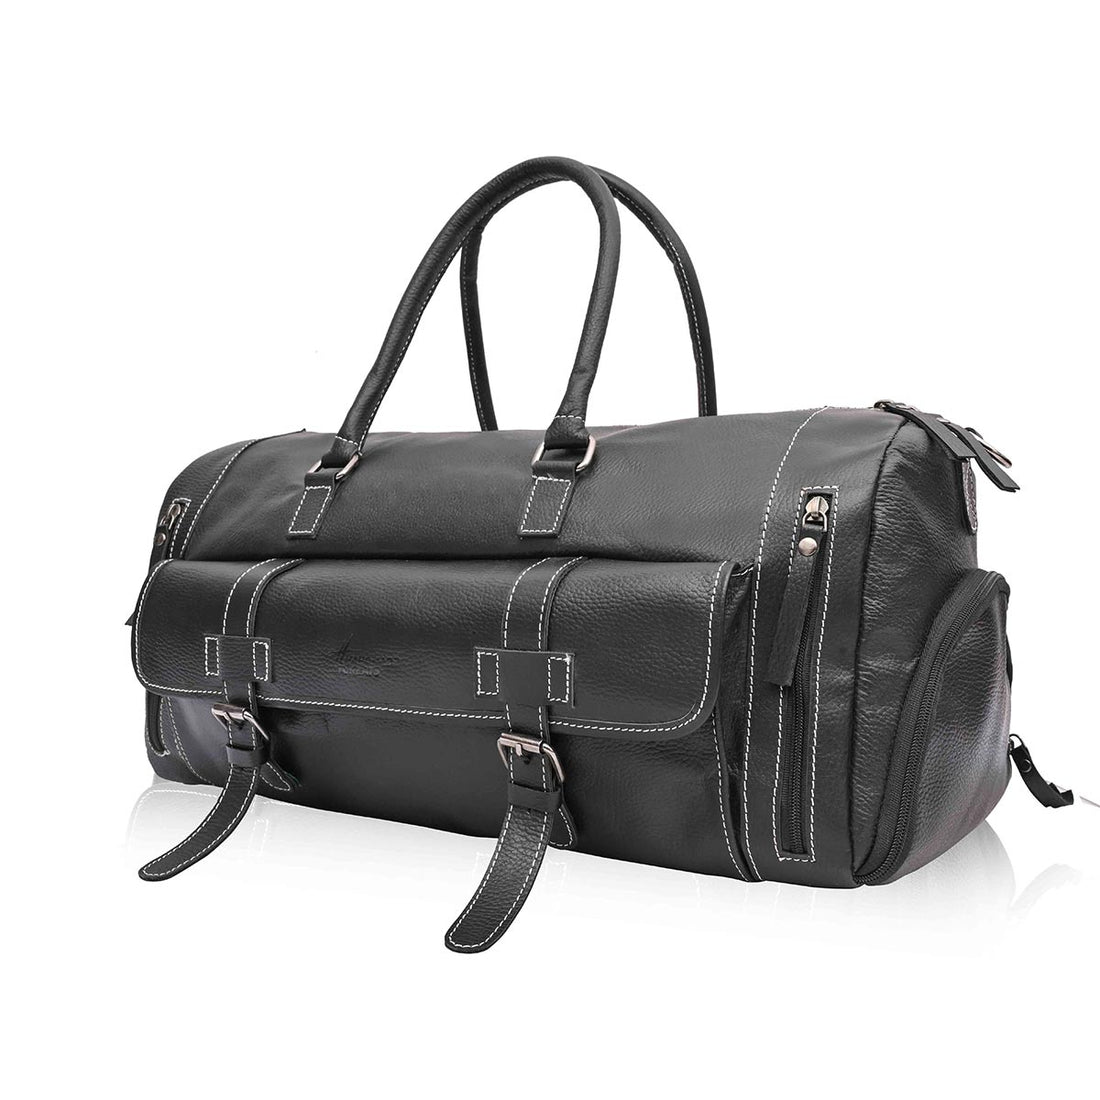 BlackPanther- Leather Duffle Bag 22 Inches